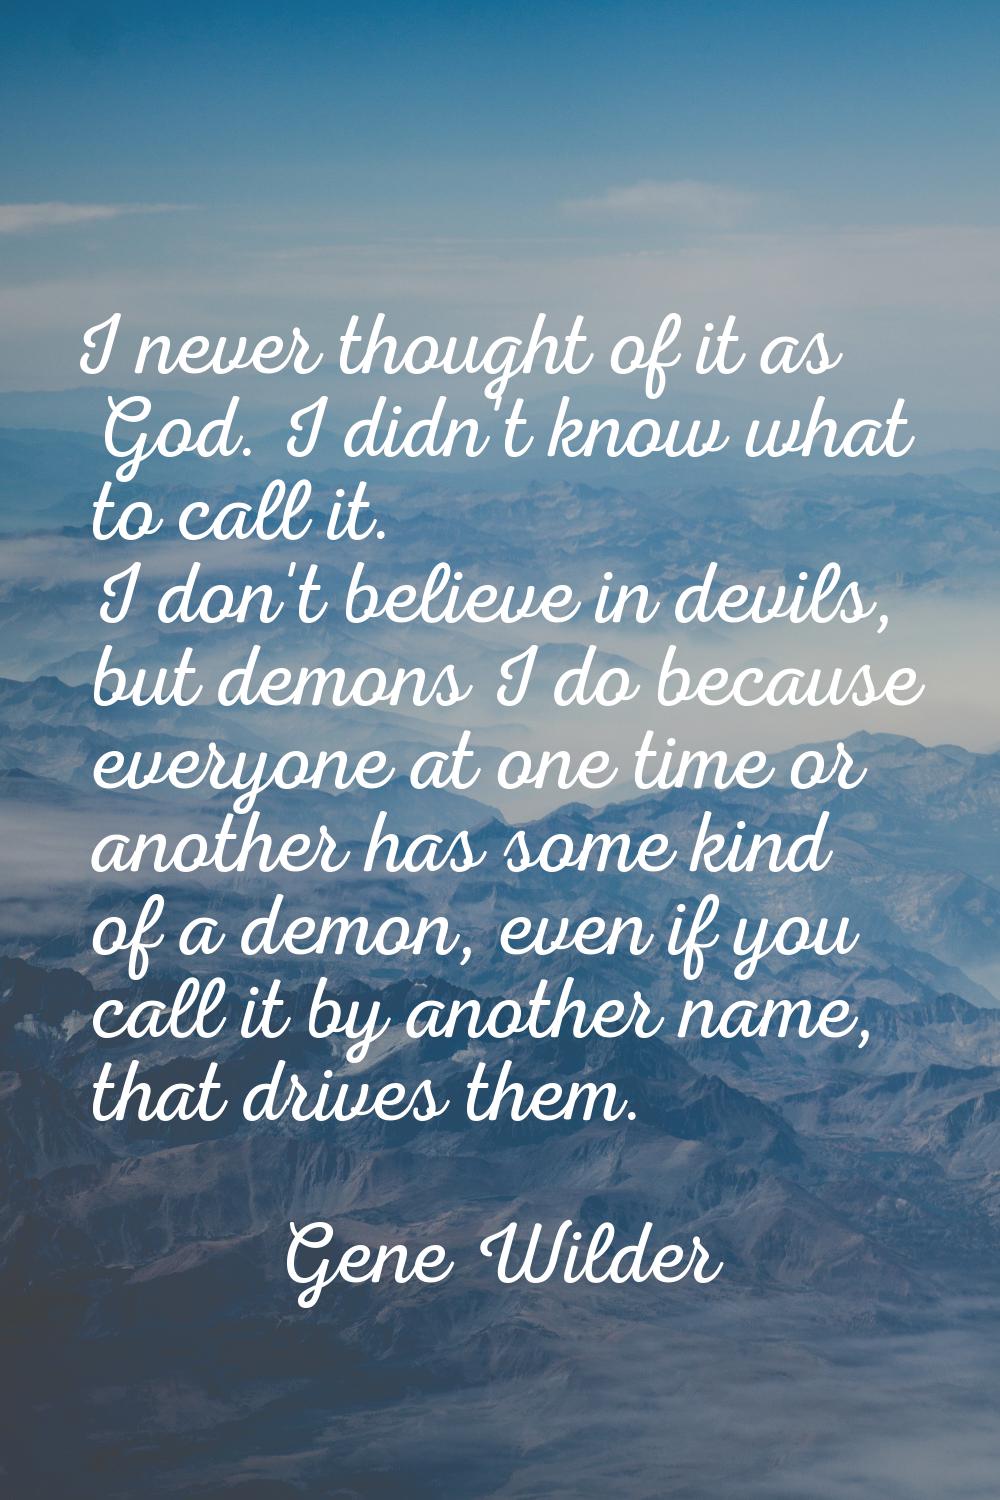 I never thought of it as God. I didn't know what to call it. I don't believe in devils, but demons 